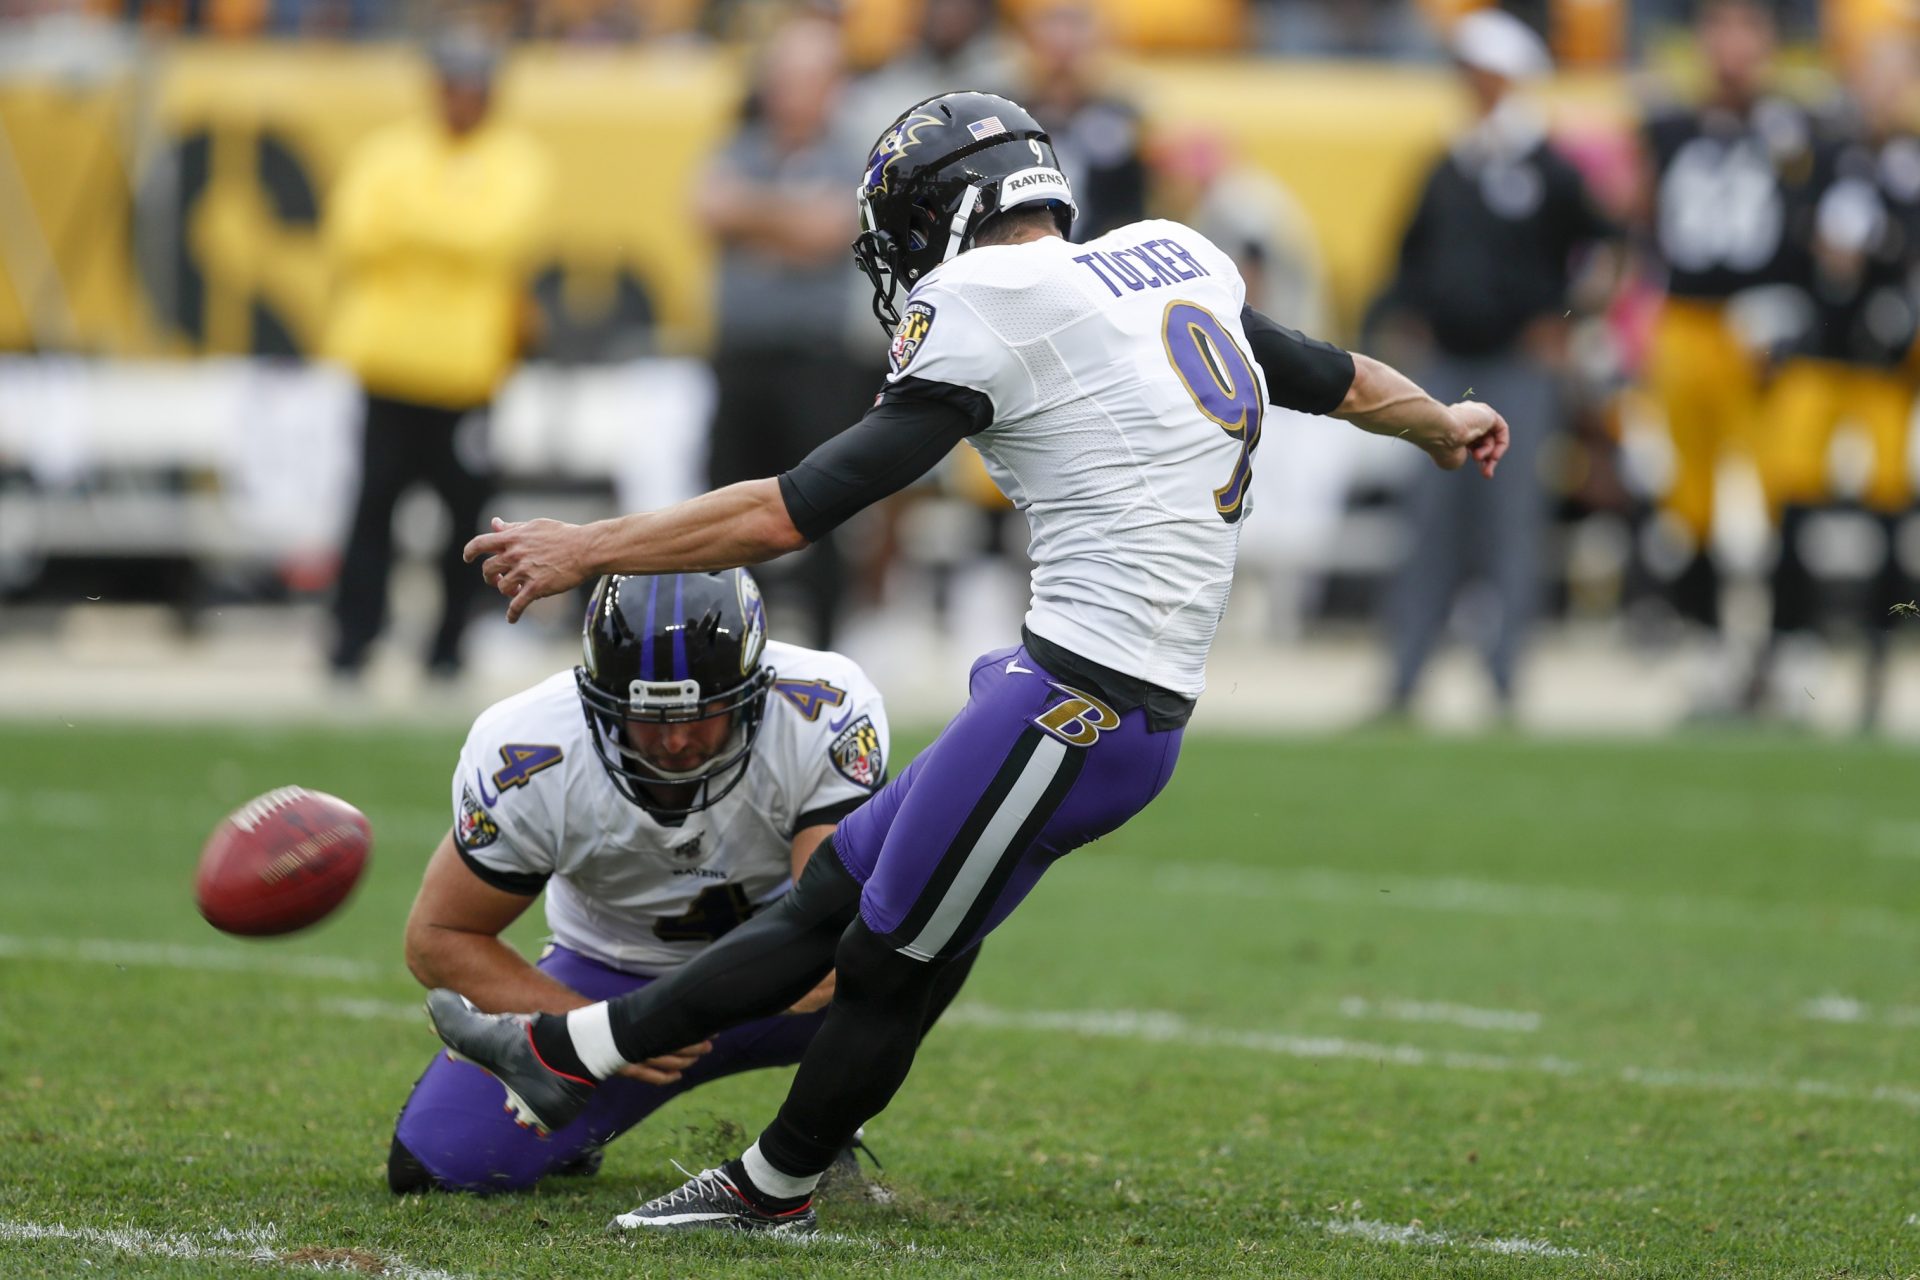 Baltimore Ravens kicker Justin Tucker (9) kicks a field goal as Sam Koch (4) holds to defeat the Pittsburgh Steelers in overtime of an NFL football game, Sunday, Oct. 6, 2019, in Pittsburgh. The Ravens won 26-23.